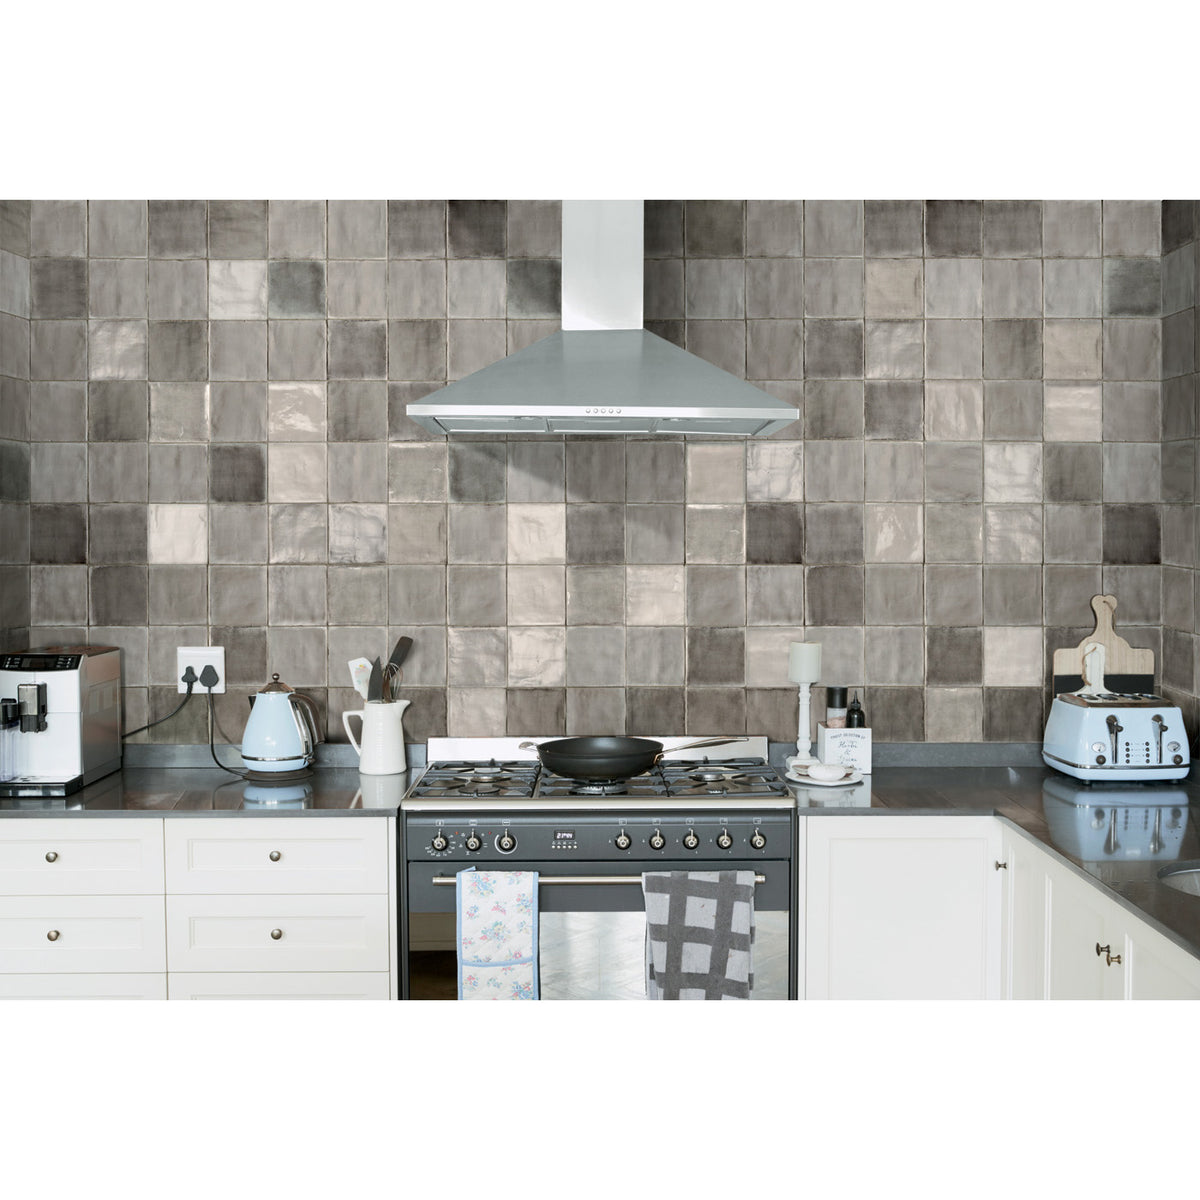 Sartoria - T Square Collection - 6 in. x 6 in. Wall Tile - Cozy Nest Installed